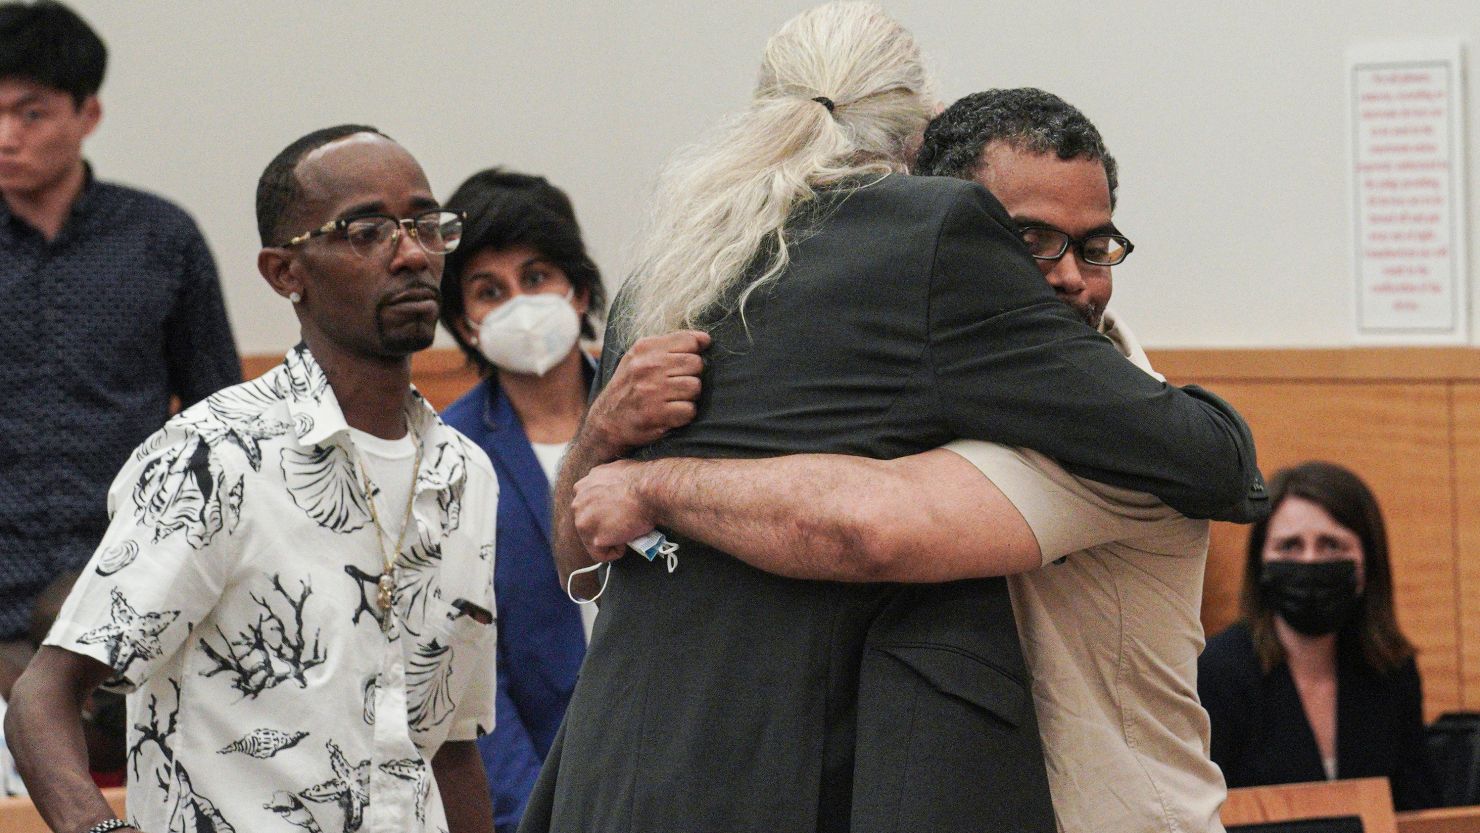 Vincent Ellerbe, left, approaches as Thomas Malik, right, embraces his lawyer Ron Kuby, center, following an exoneration hearing at Brooklyn Supreme Court on July 15, 2022, in New York.